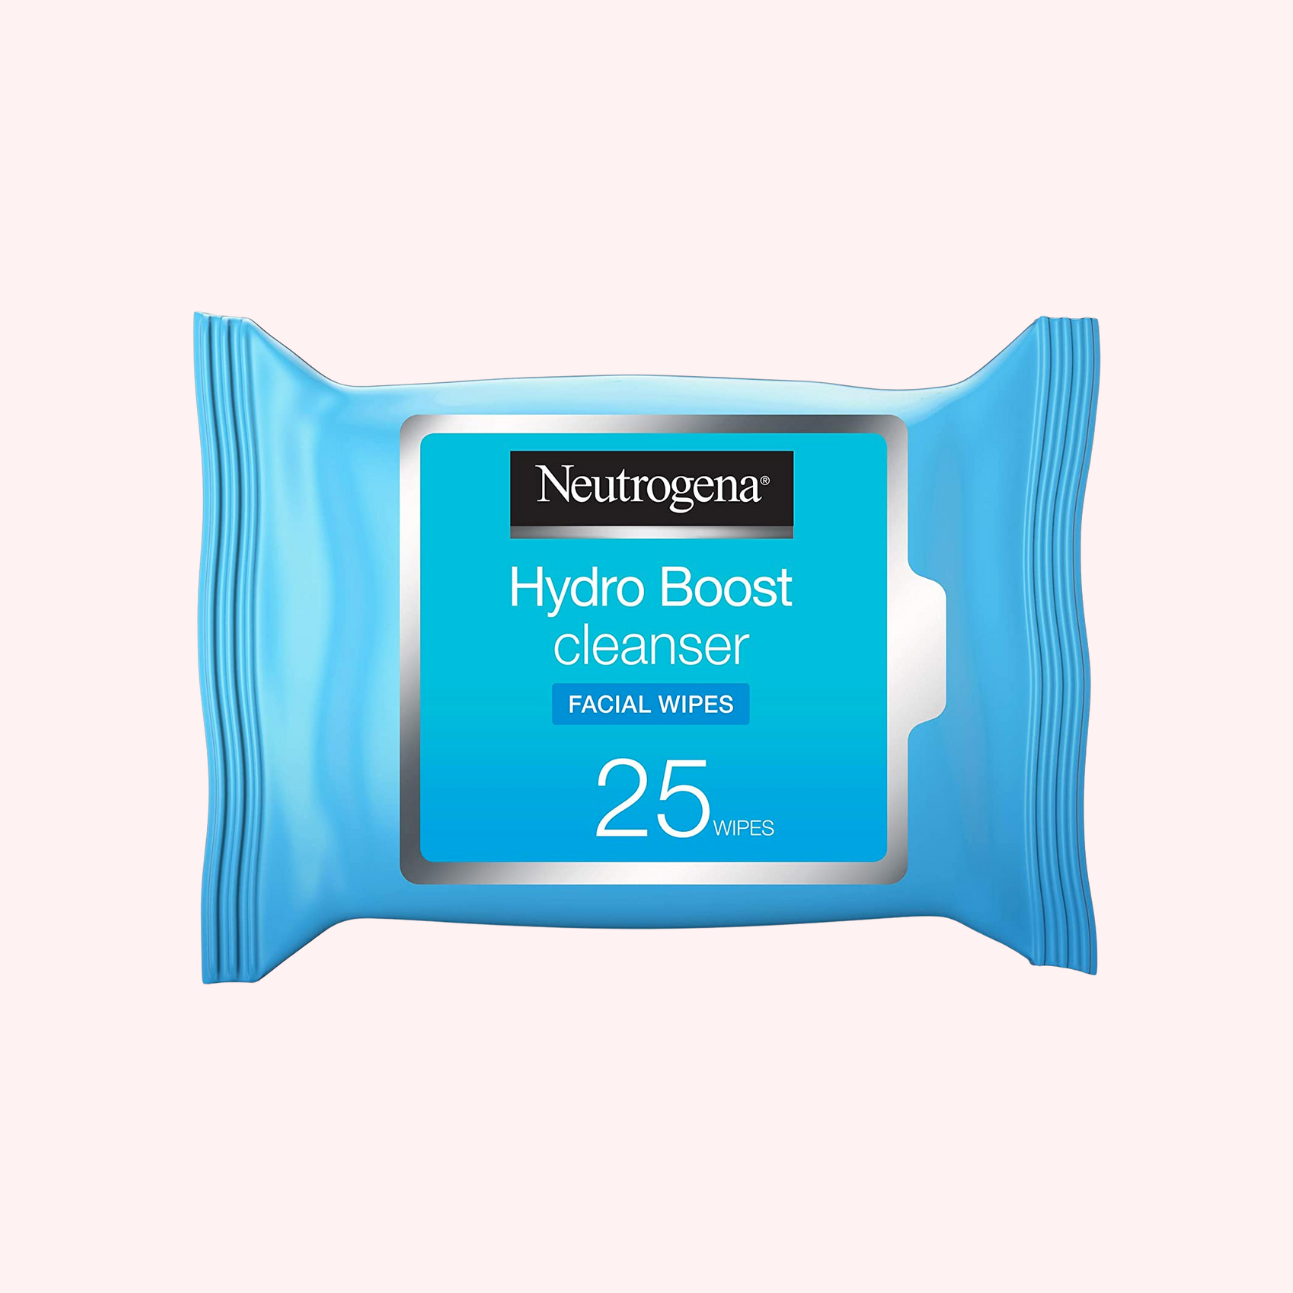 Neutrogena Hydro-Boost Cleansing Facial Wipes